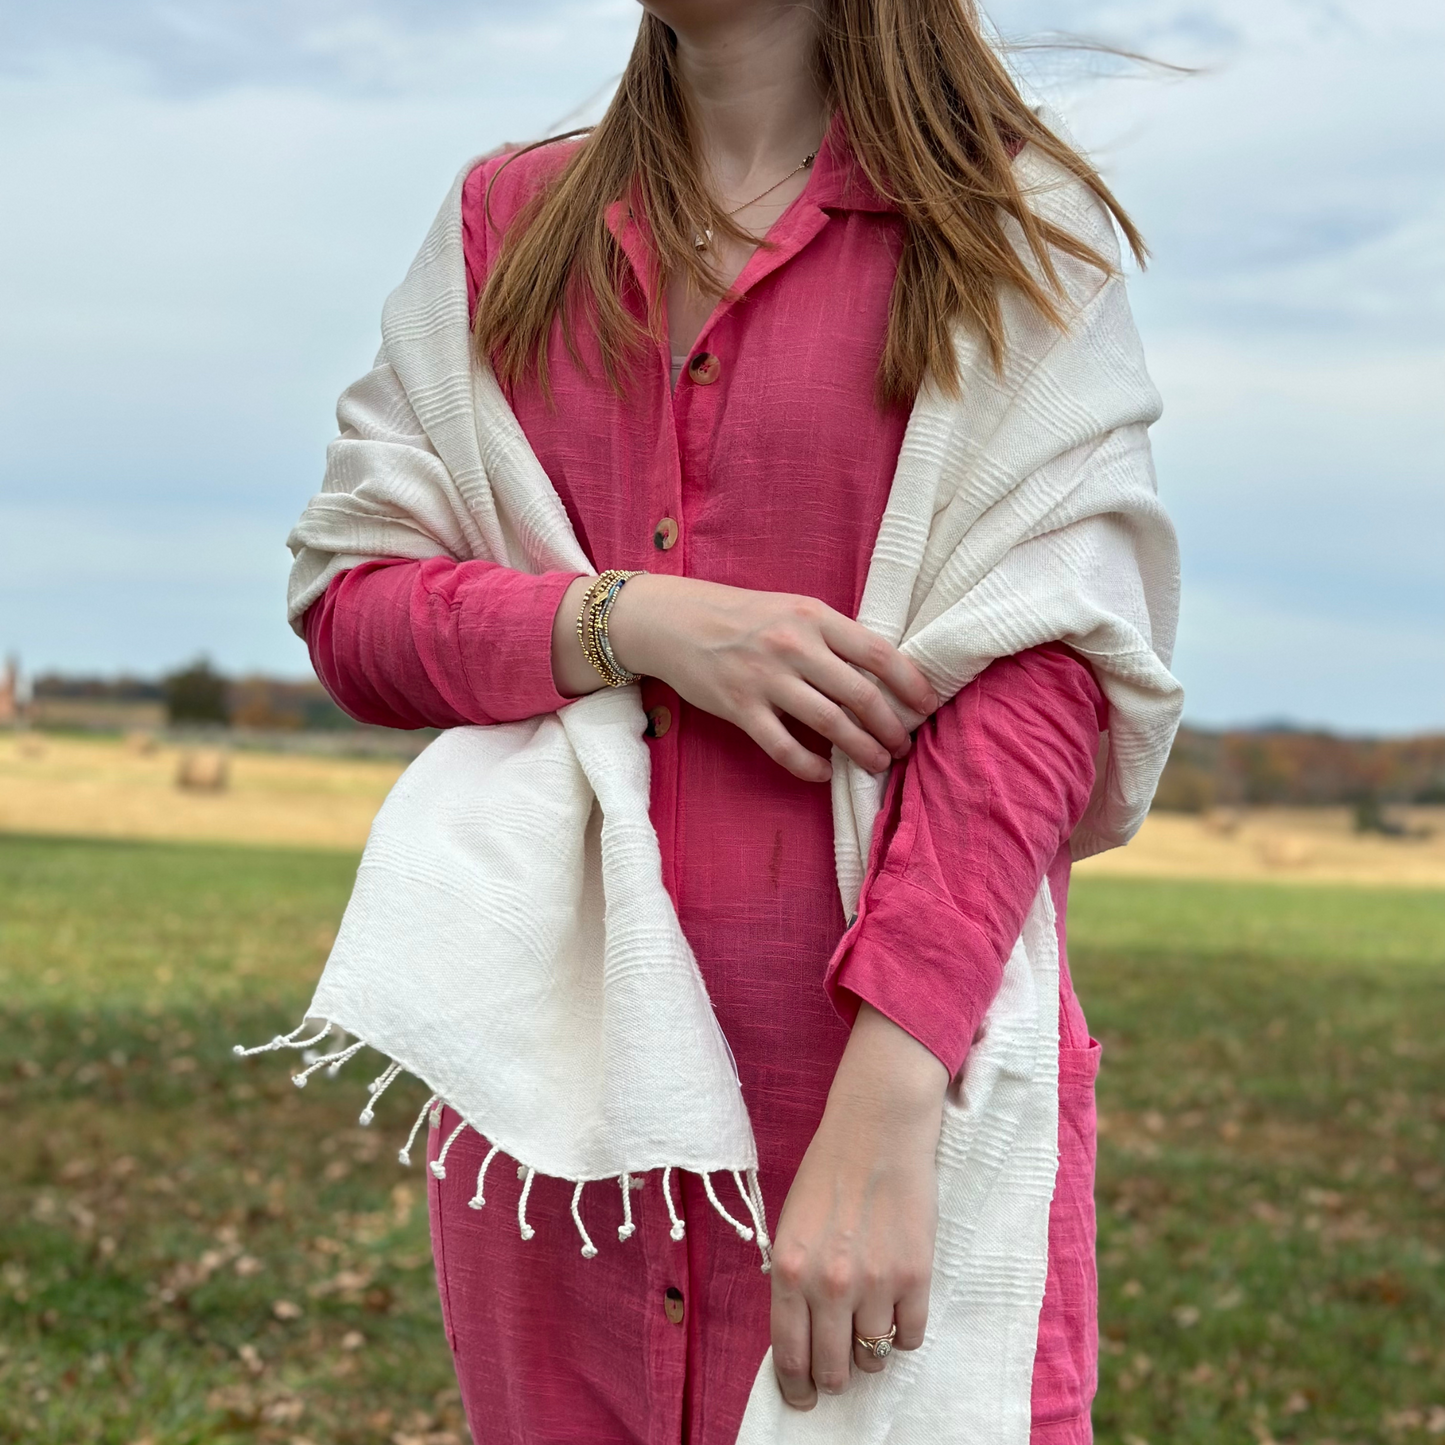 
                  
                    Elevate your winter style with our latest collection! Designed for both warmth and flair, these pieces feature an elegant contrast, crafted from 100% Cotton for a soft touch. Stay cozy and chic! #BlackFridayFashion #WinterStyle #ChicAndCozy #HandmadeFashion #WarmthWithFlair #LimitedTimeOffers #GetItFirst #ShopSmart #UnbeatablePrices
                  
                